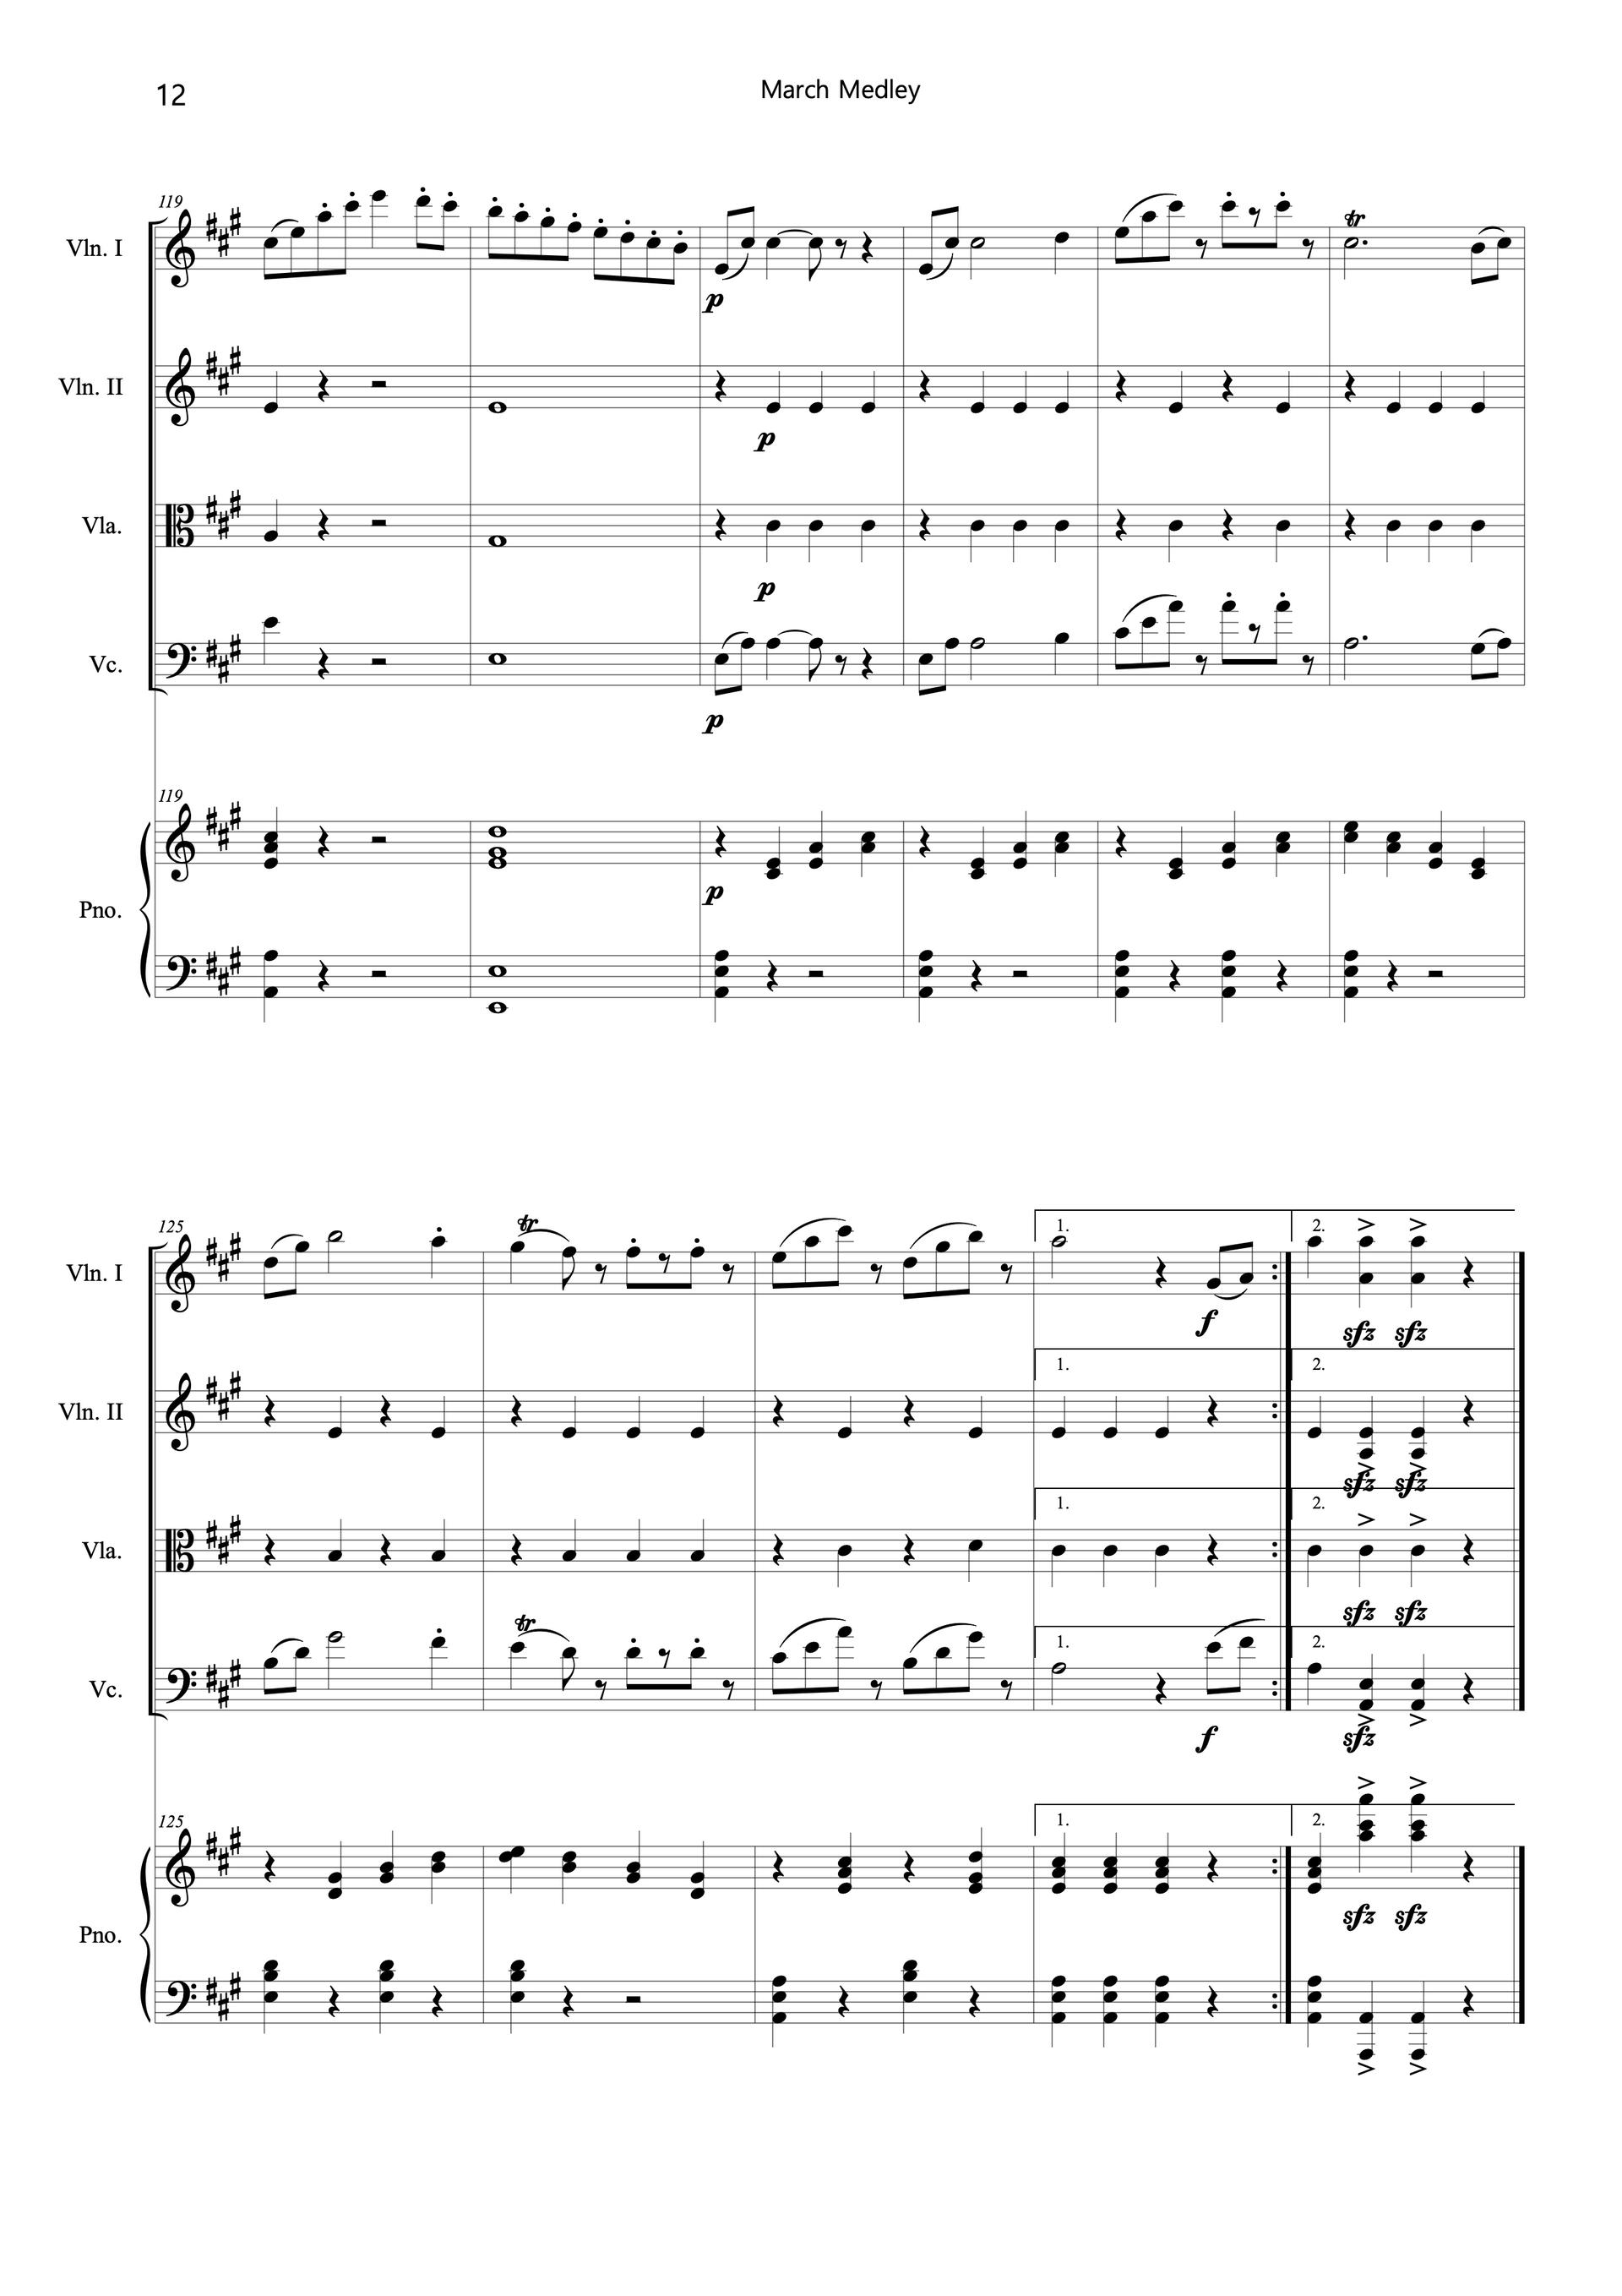 Sheet music of Carmen Medley arranged for violins, viola, cello and piano quintet preview page 12